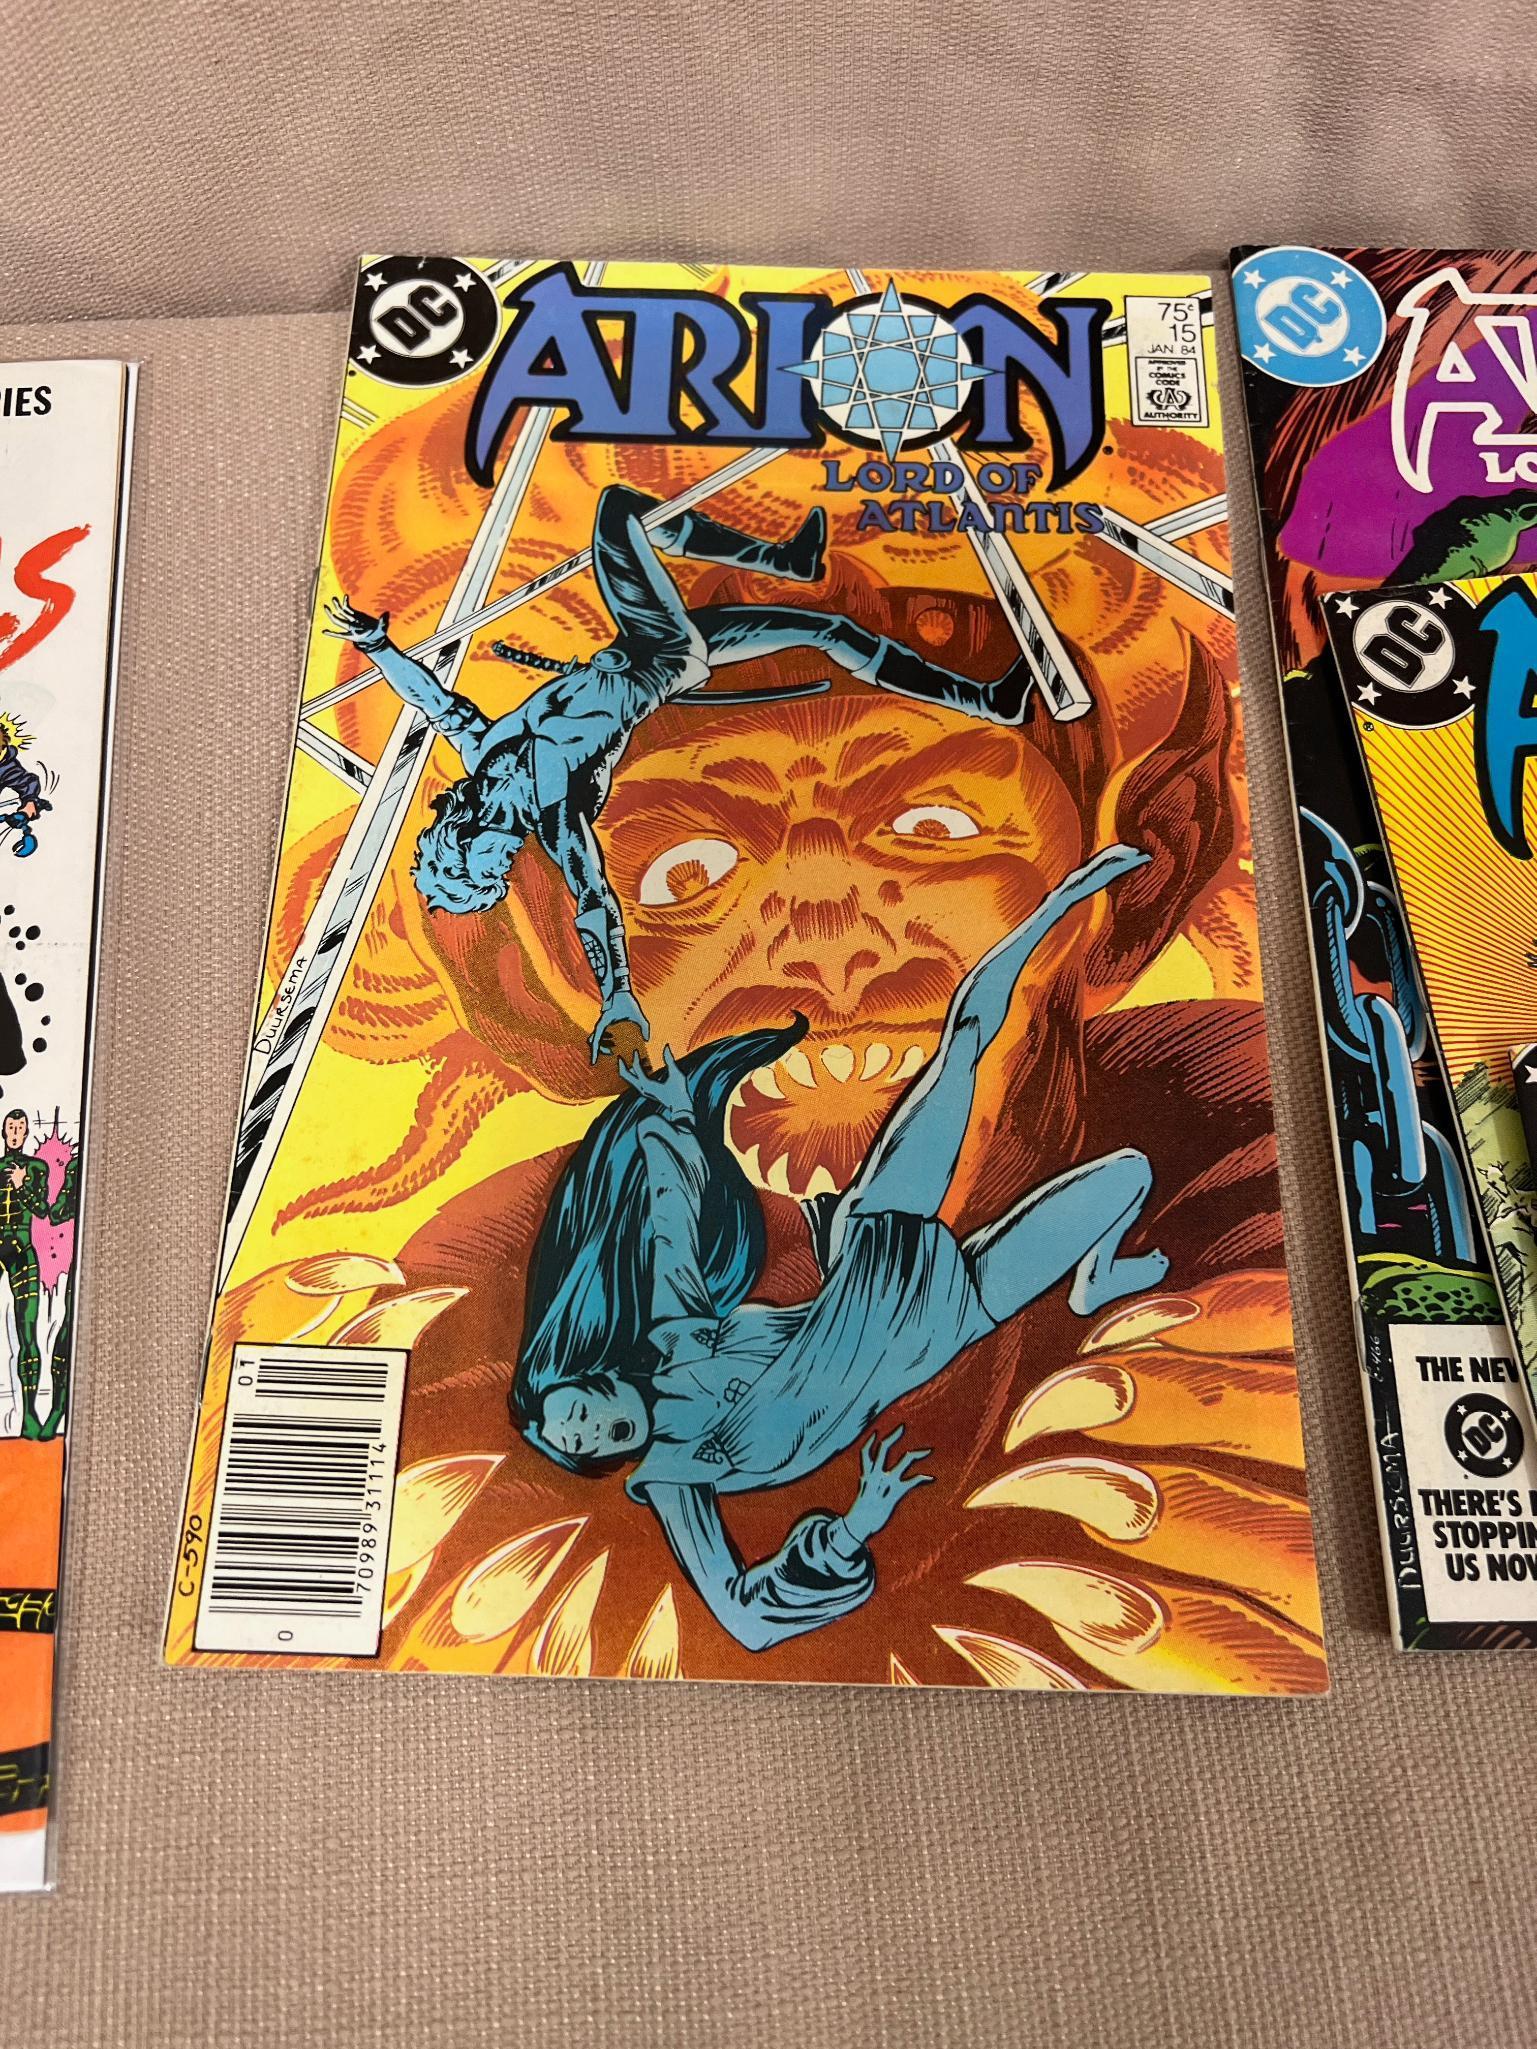 Fallen Angels 1-8 and 13 Various issues of Arion incl no. 1